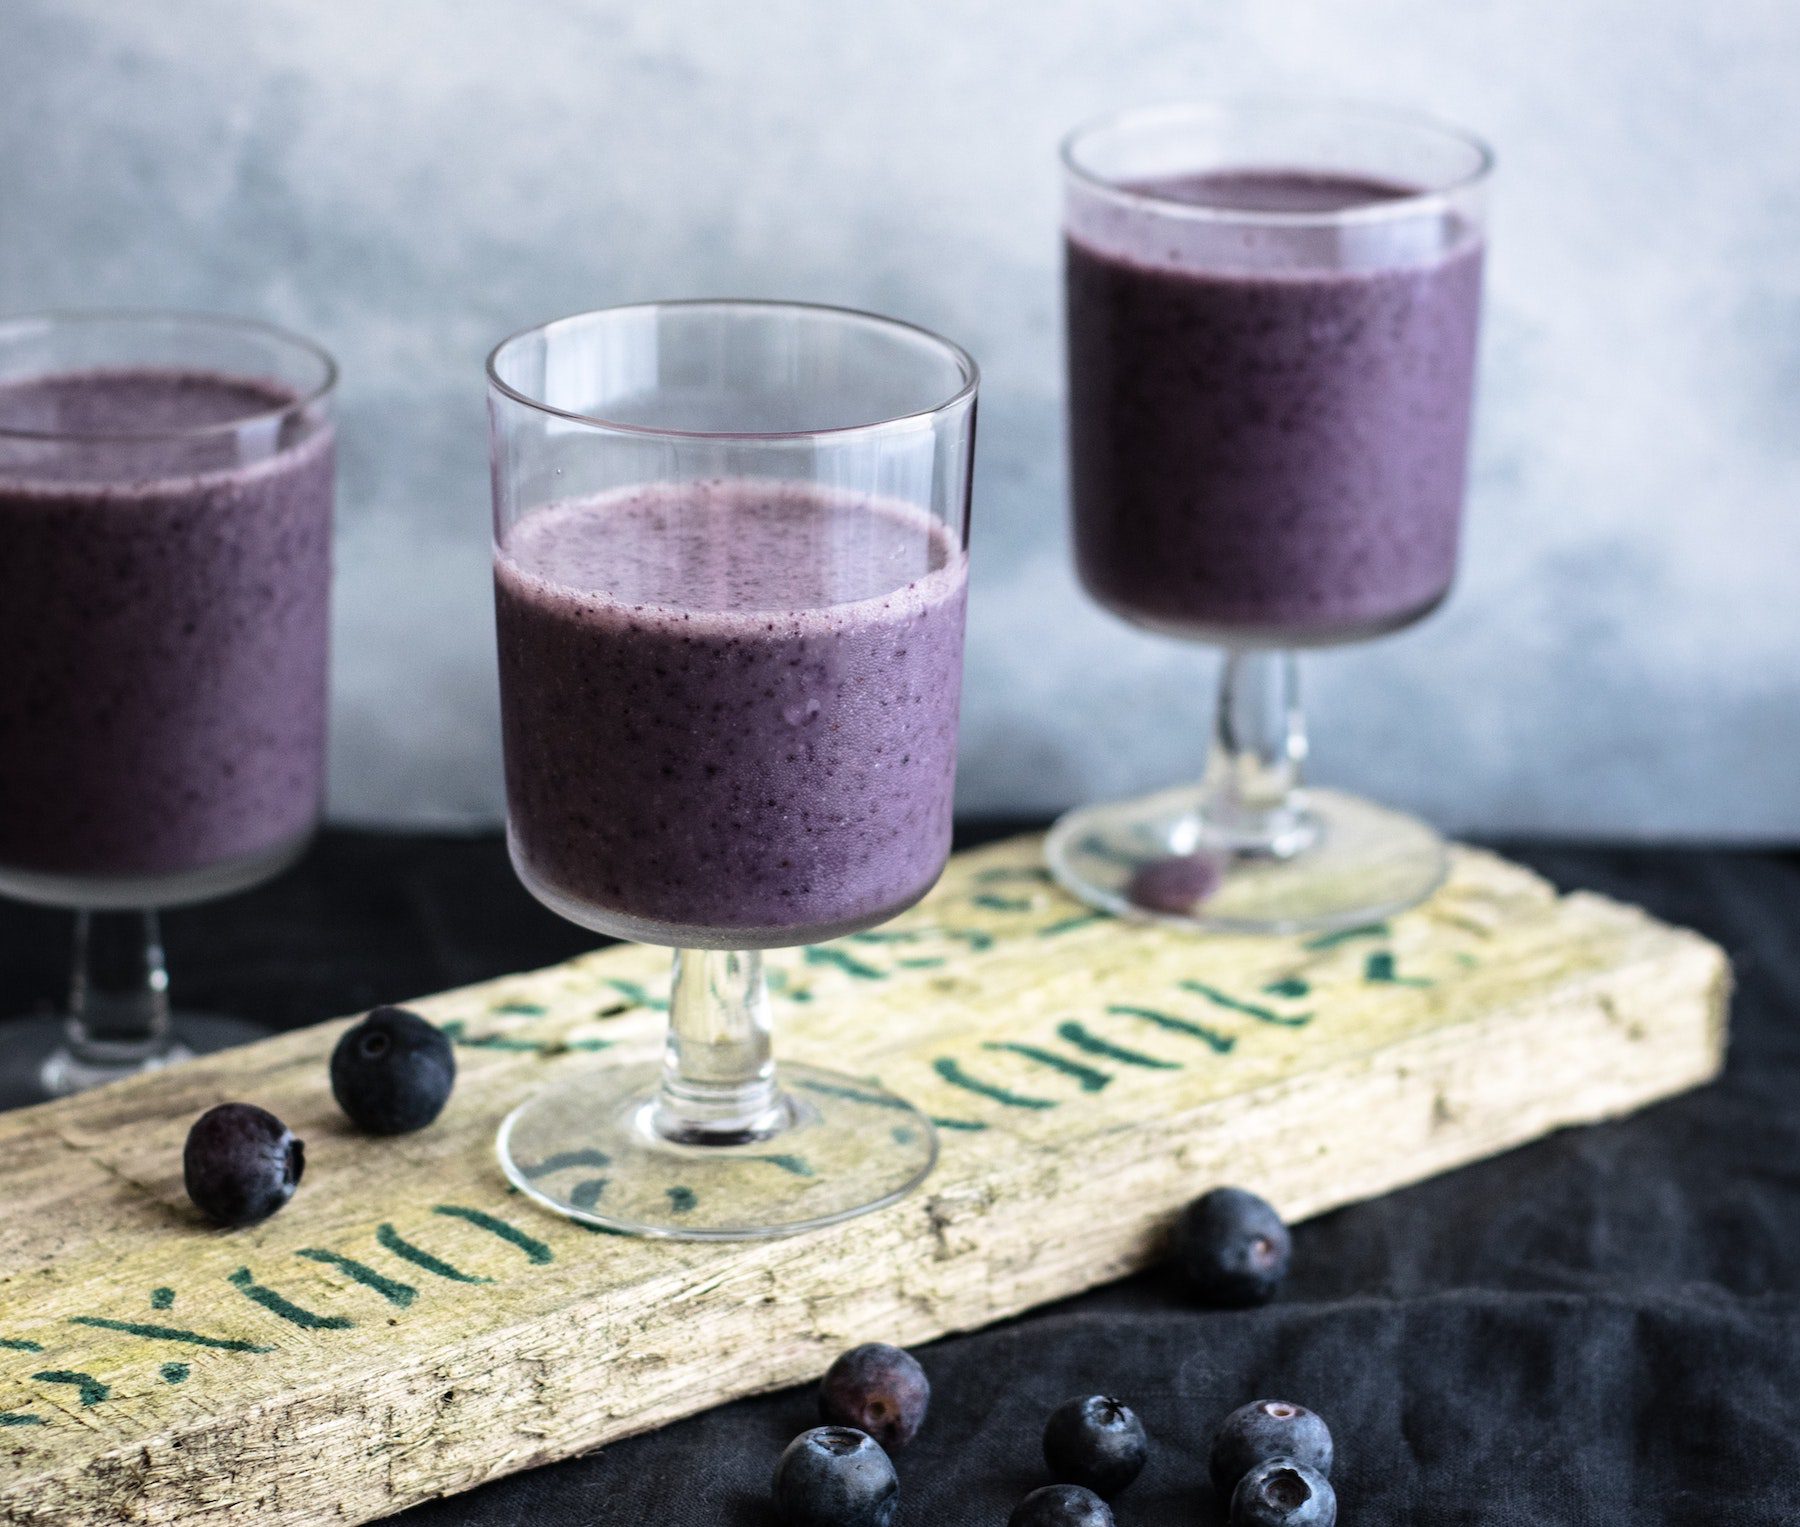 Blueberry smoothies in small decorative glasses on wooden serving tray, with fresh berries scattered nearby.